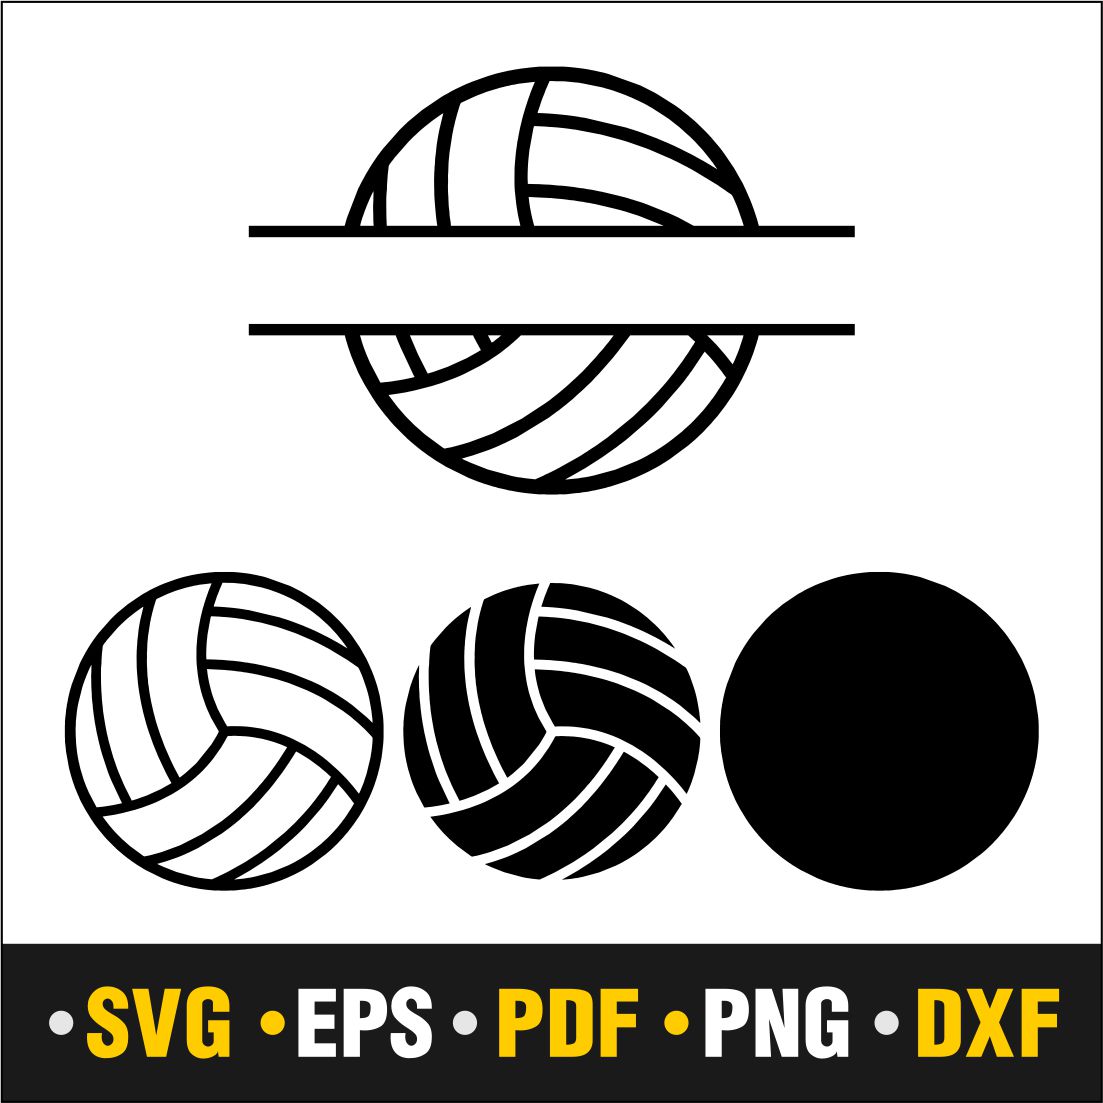 Wonderful images of silhouettes of volleyballs